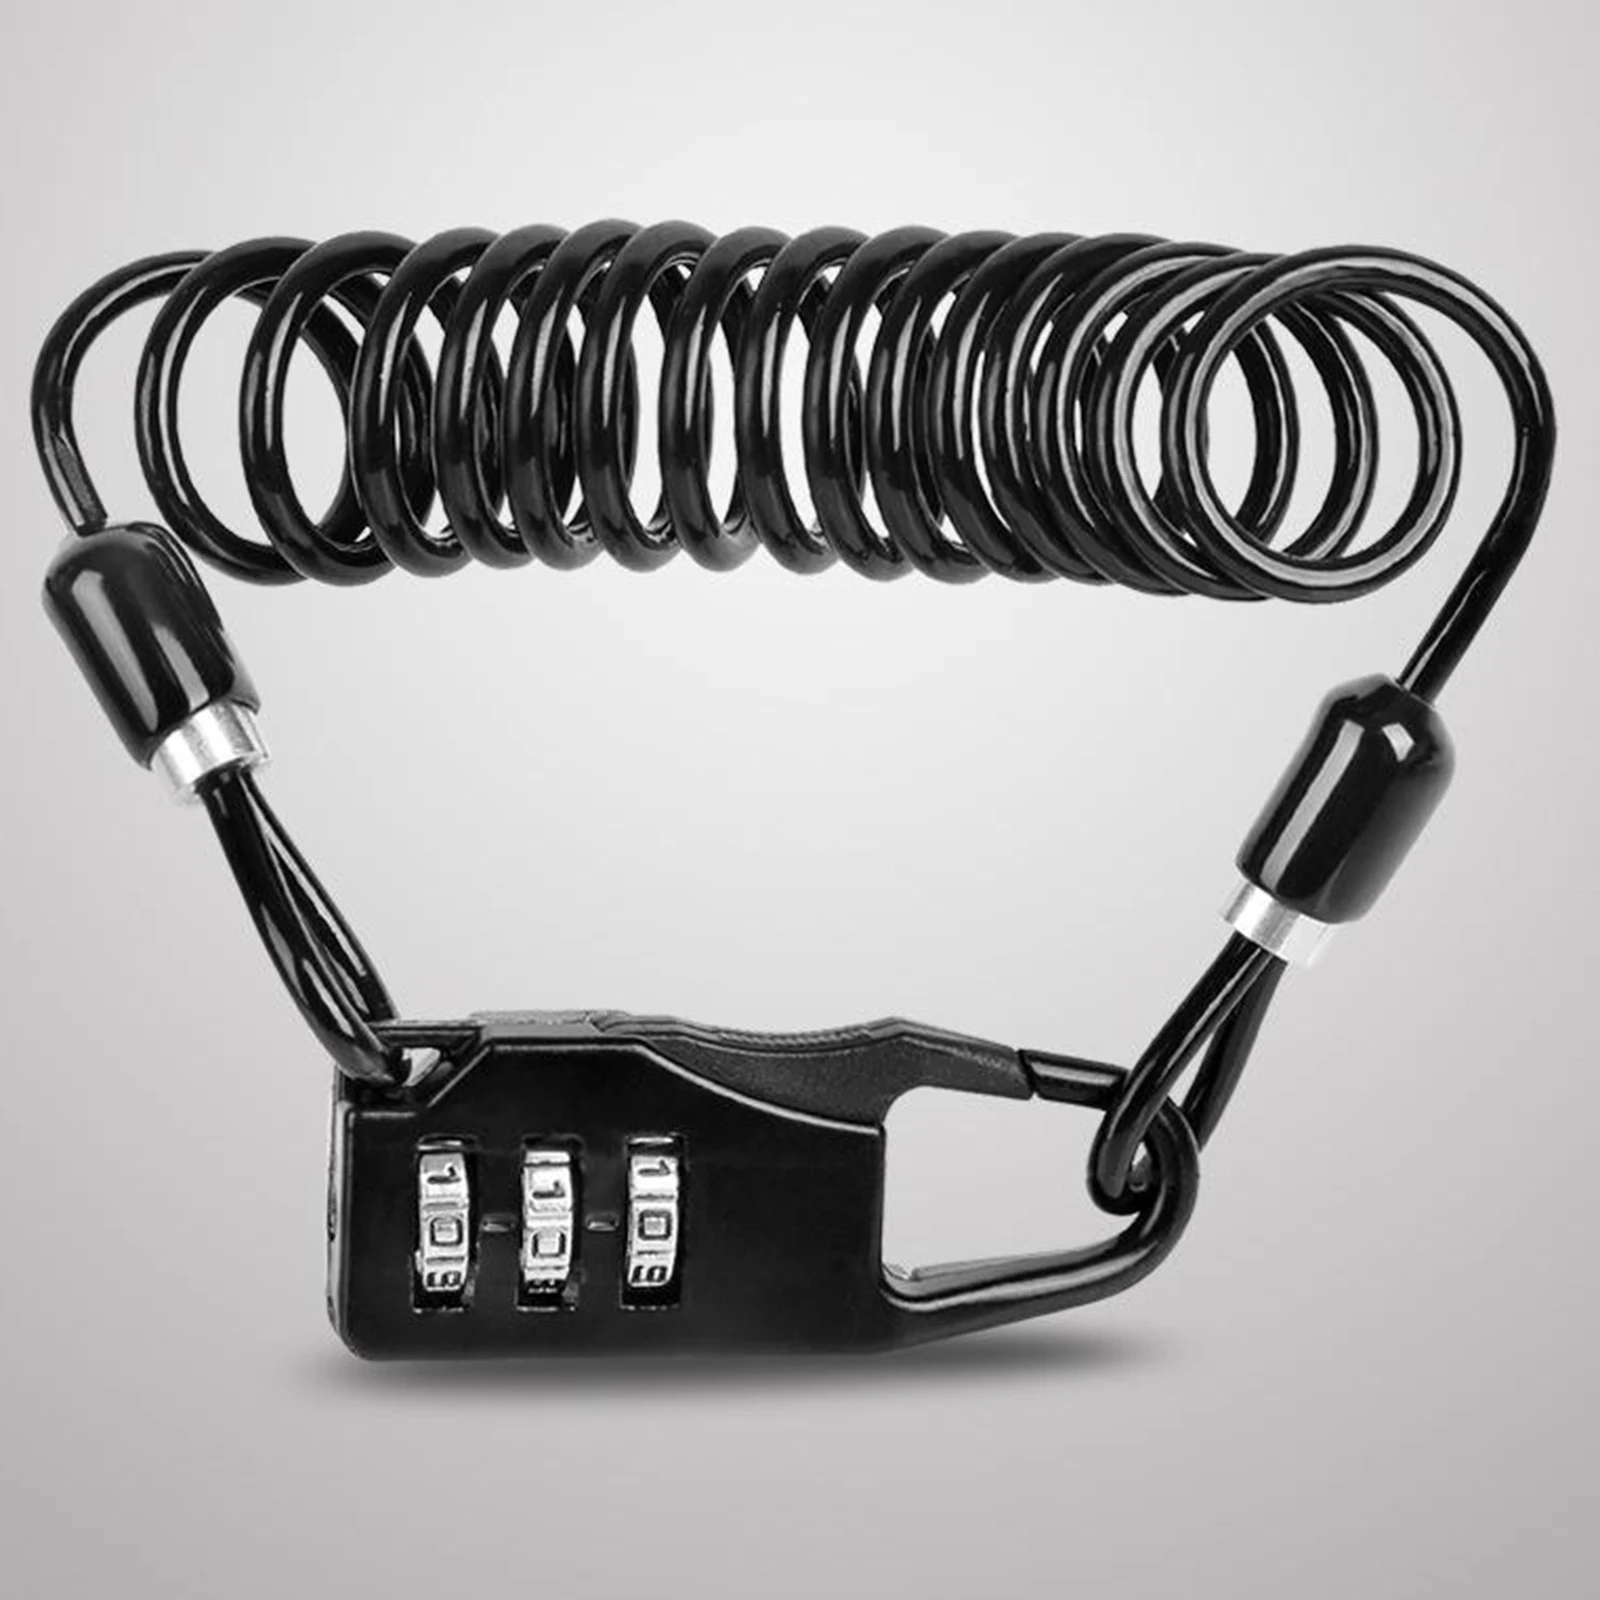 Lock, Combination PIN Locking Carabiner Device, Secure & Tough, Up to 1.2M/47.2 inches